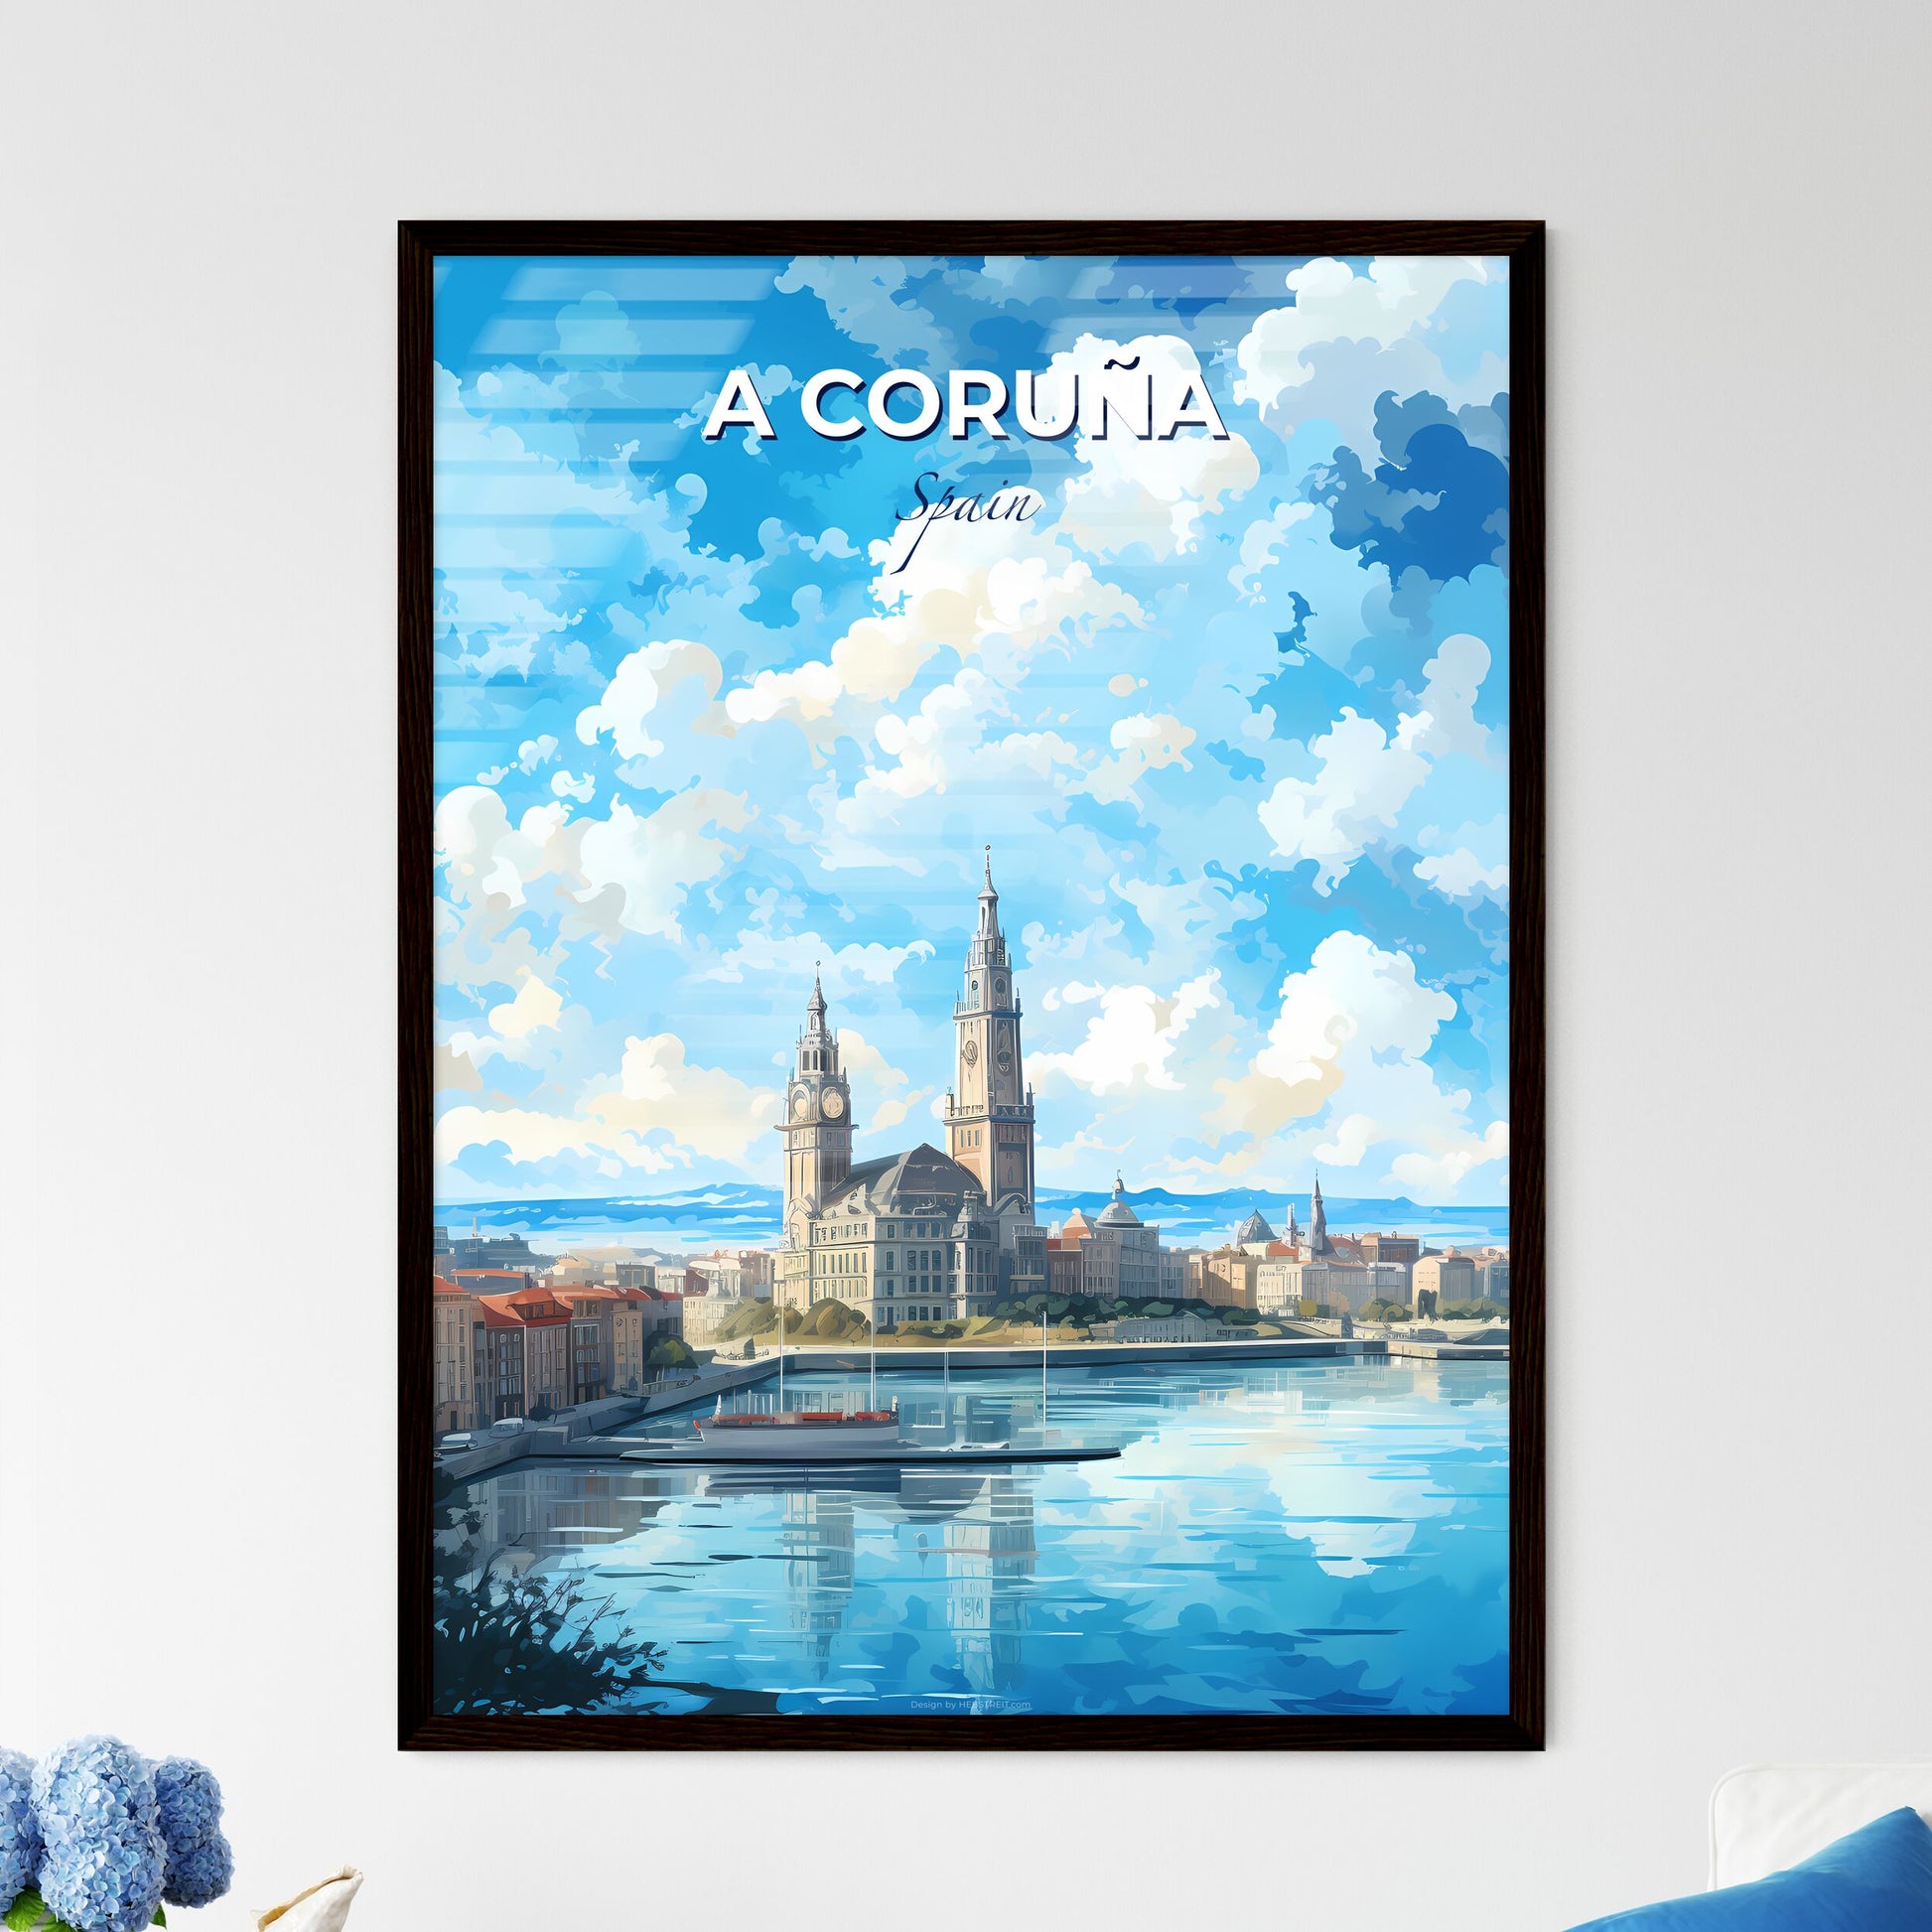 A Corua Spain Skyline - A City With A River And A Boat - Customizable Travel Gift Default Title